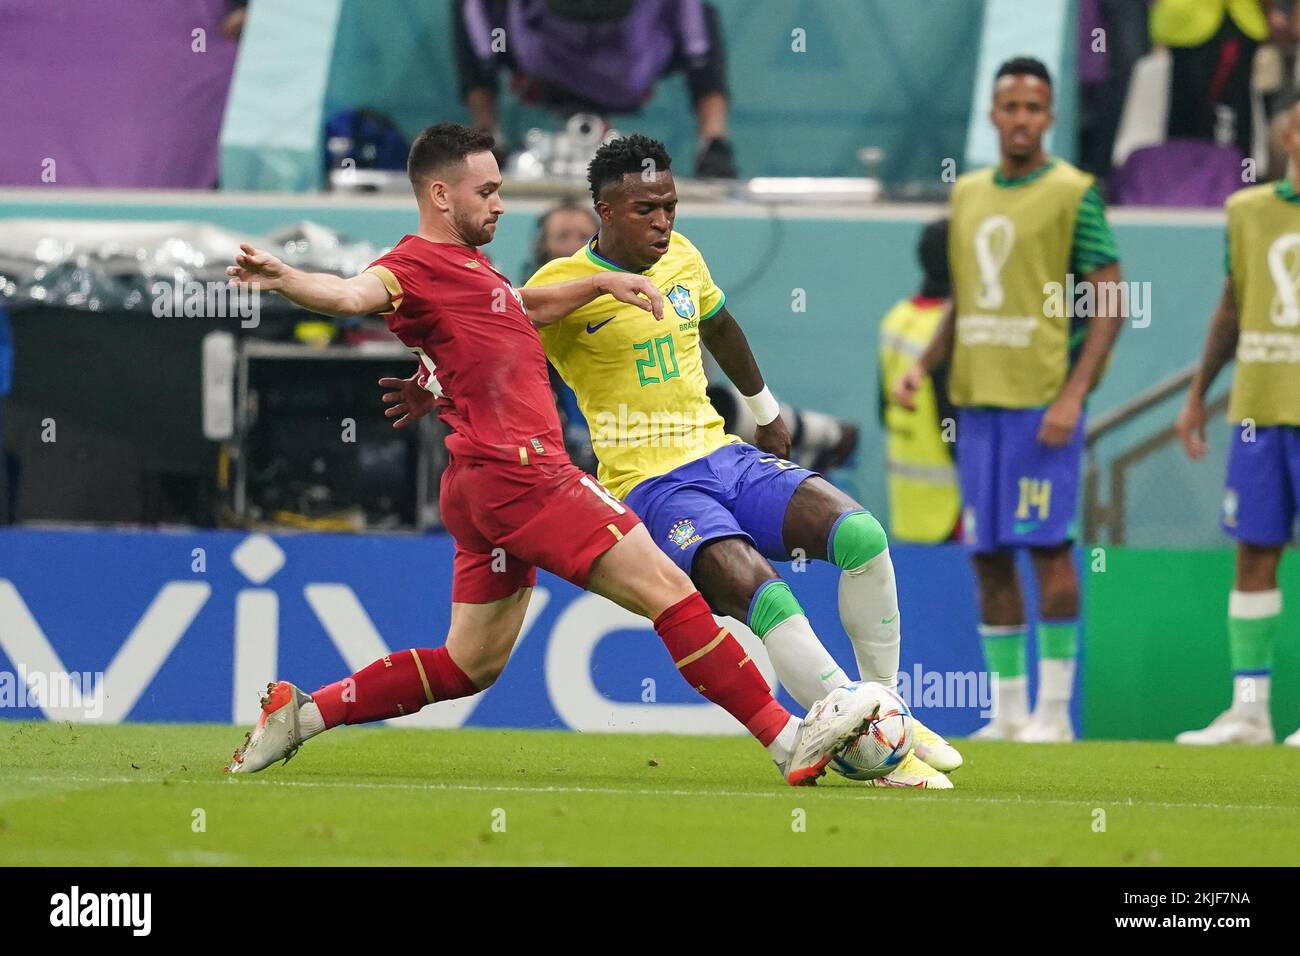 LUSAIL, QATAR - NOVEMBER 24: Player of Brazil Vinícius Júnior fights for the ball with player of Serbia during the FIFA World Cup Qatar 2022 group G match between Brazil and Serbia at Lusail Stadium on November 24, 2022 in Lusail, Qatar. (Photo by Florencia Tan Jun/PxImages) Credit: Px Images/Alamy Live News Stock Photo